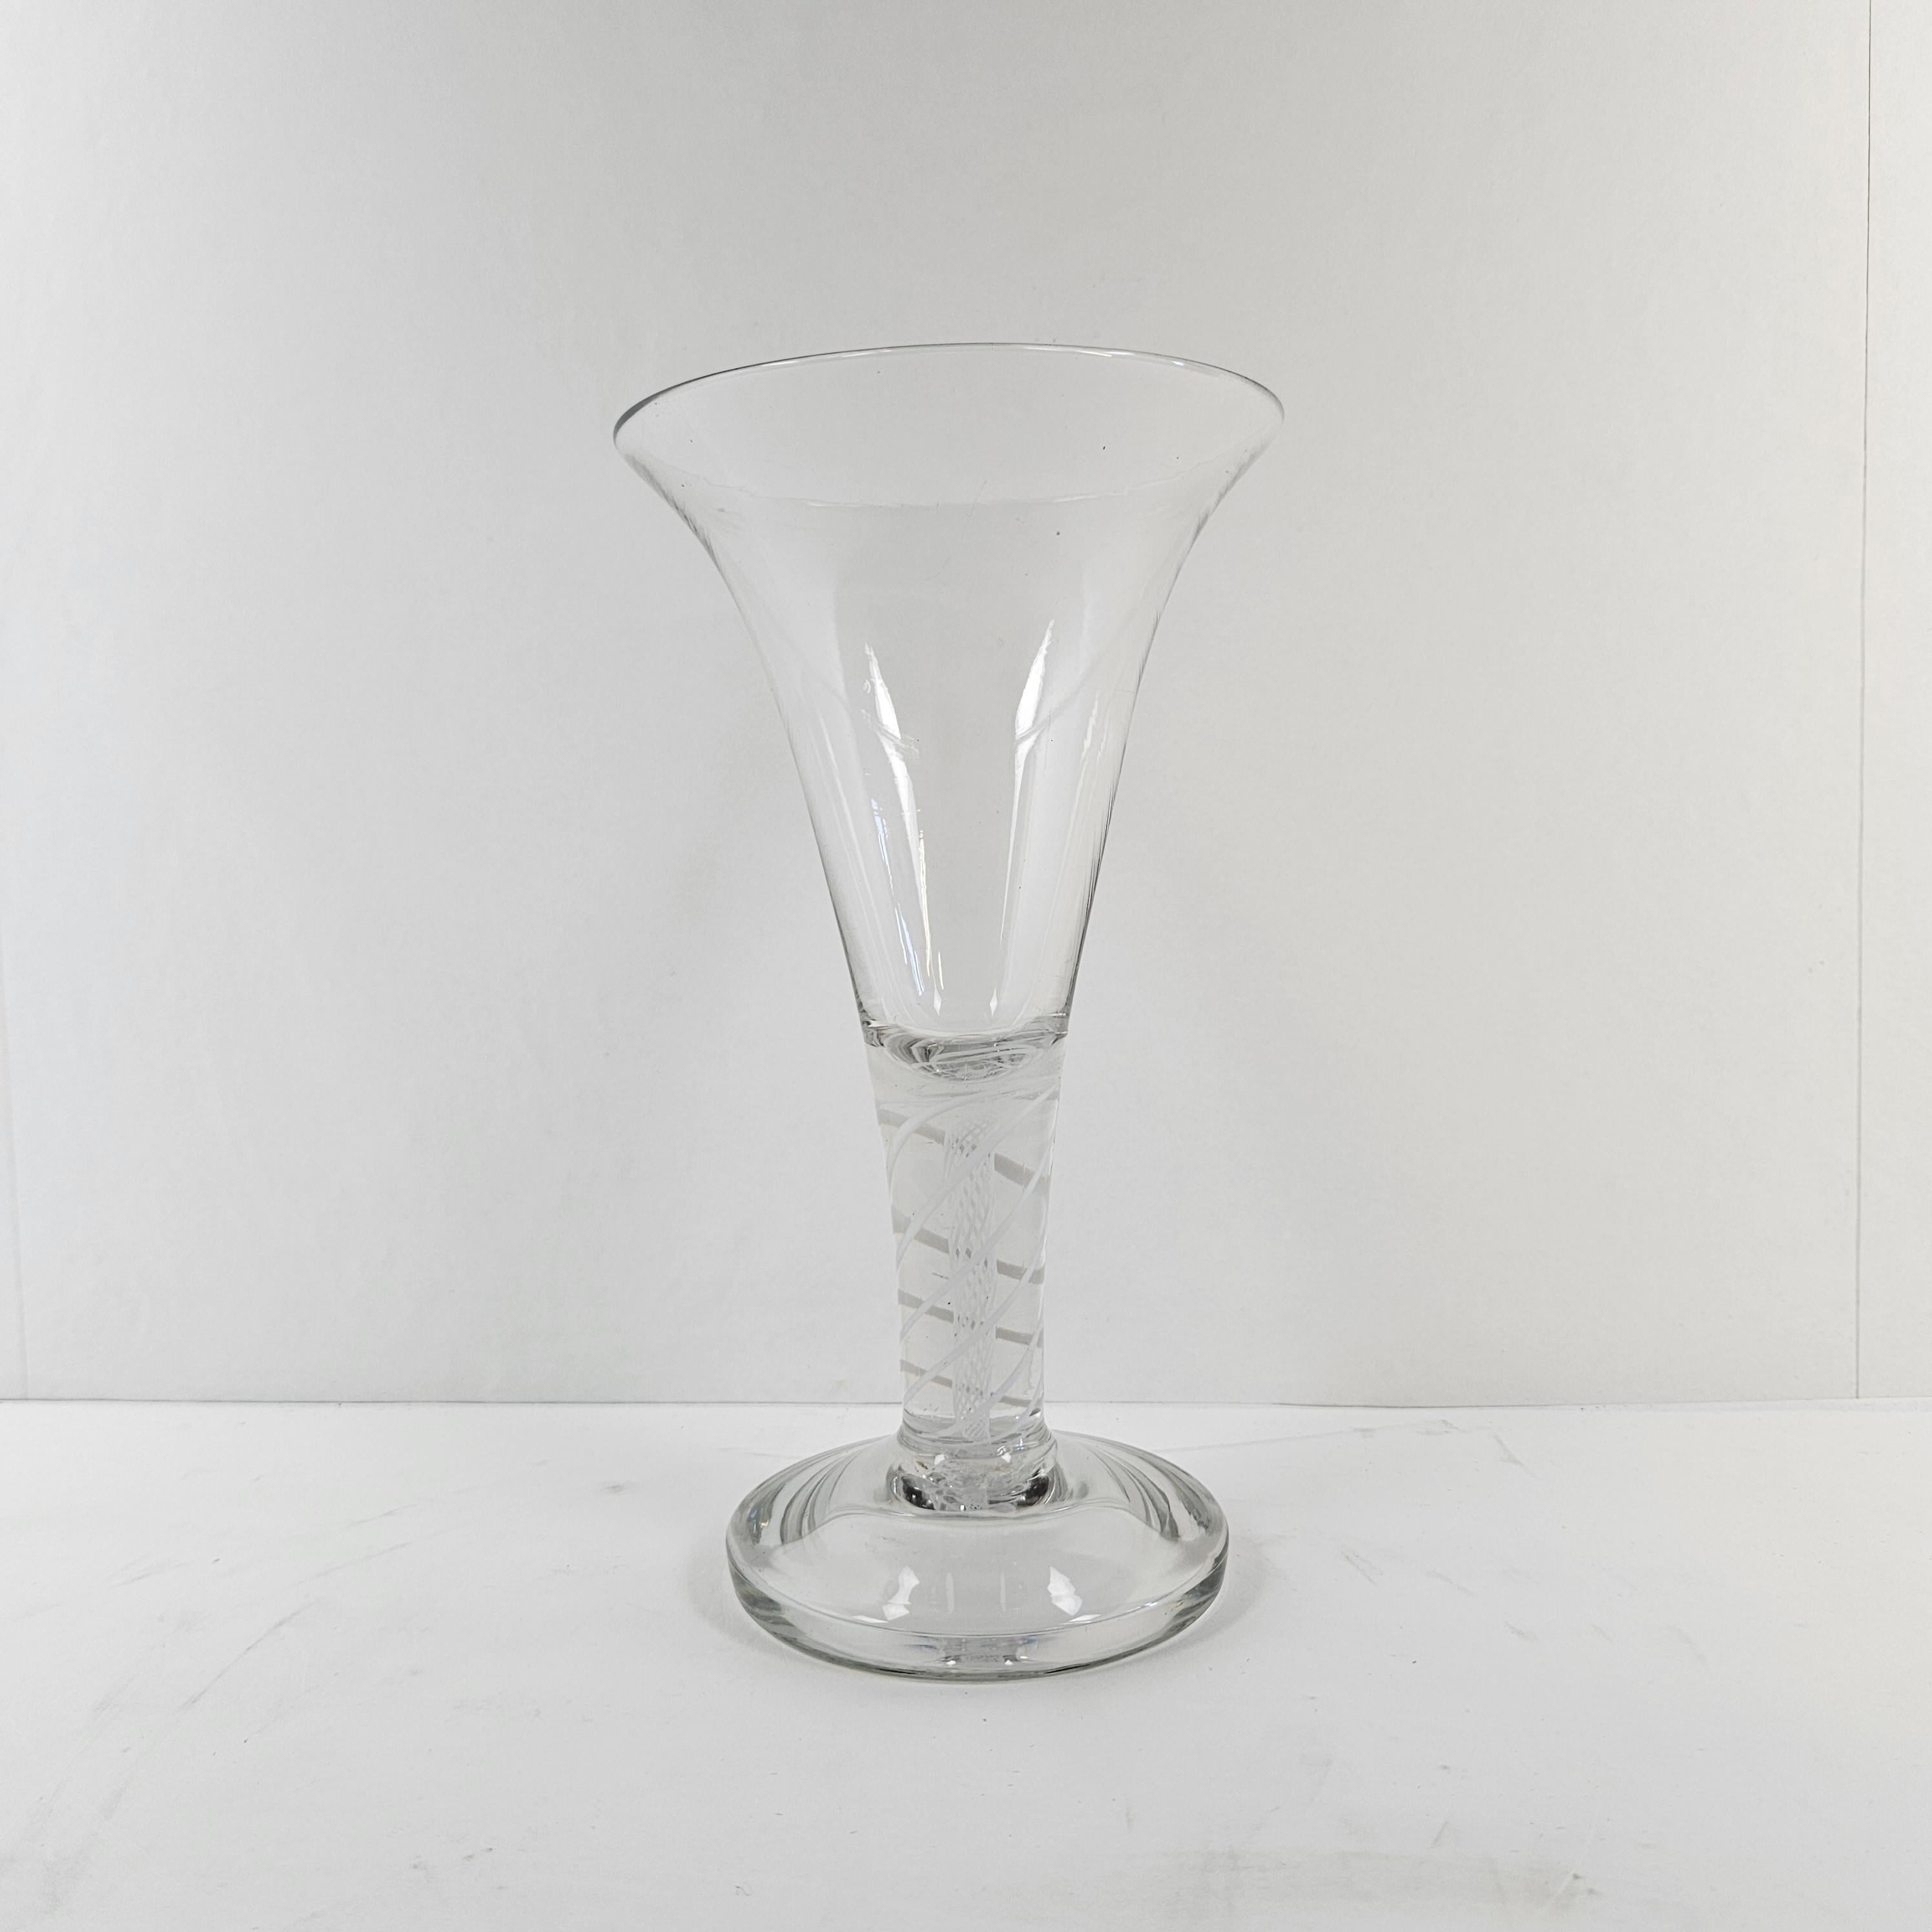 Beautiful glass vase with air twist stem.
This vase is made in The Netherlands in the 20th century.

Please take notice of the very nice details and the elegant design.
Meticulously handcrafted, this exquisite piece showcases the beauty of Dutch